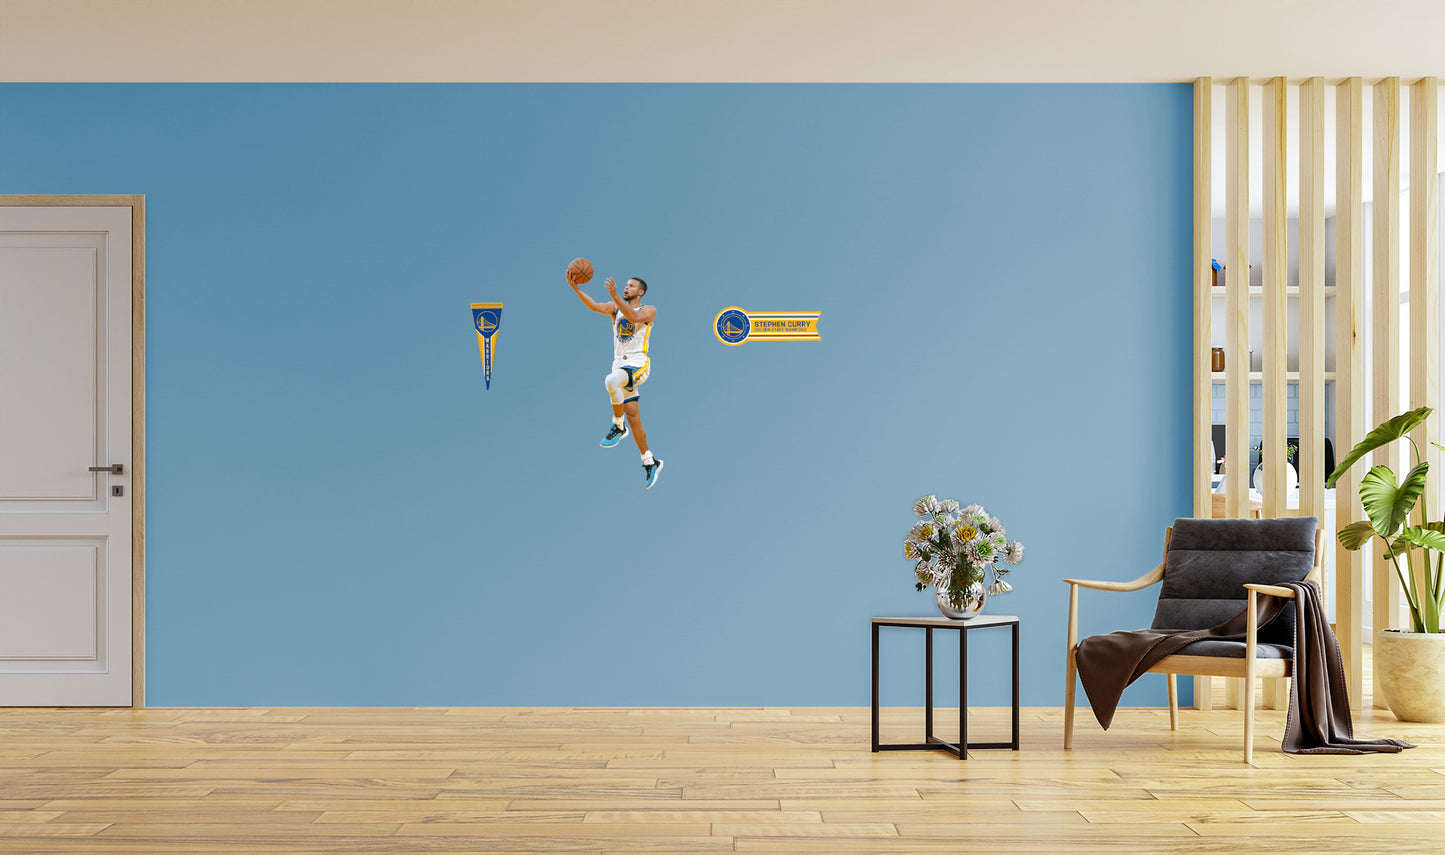 Golden State Warriors: Stephen Curry Finger Roll - Officially Licensed NBA Removable Adhesive Decal